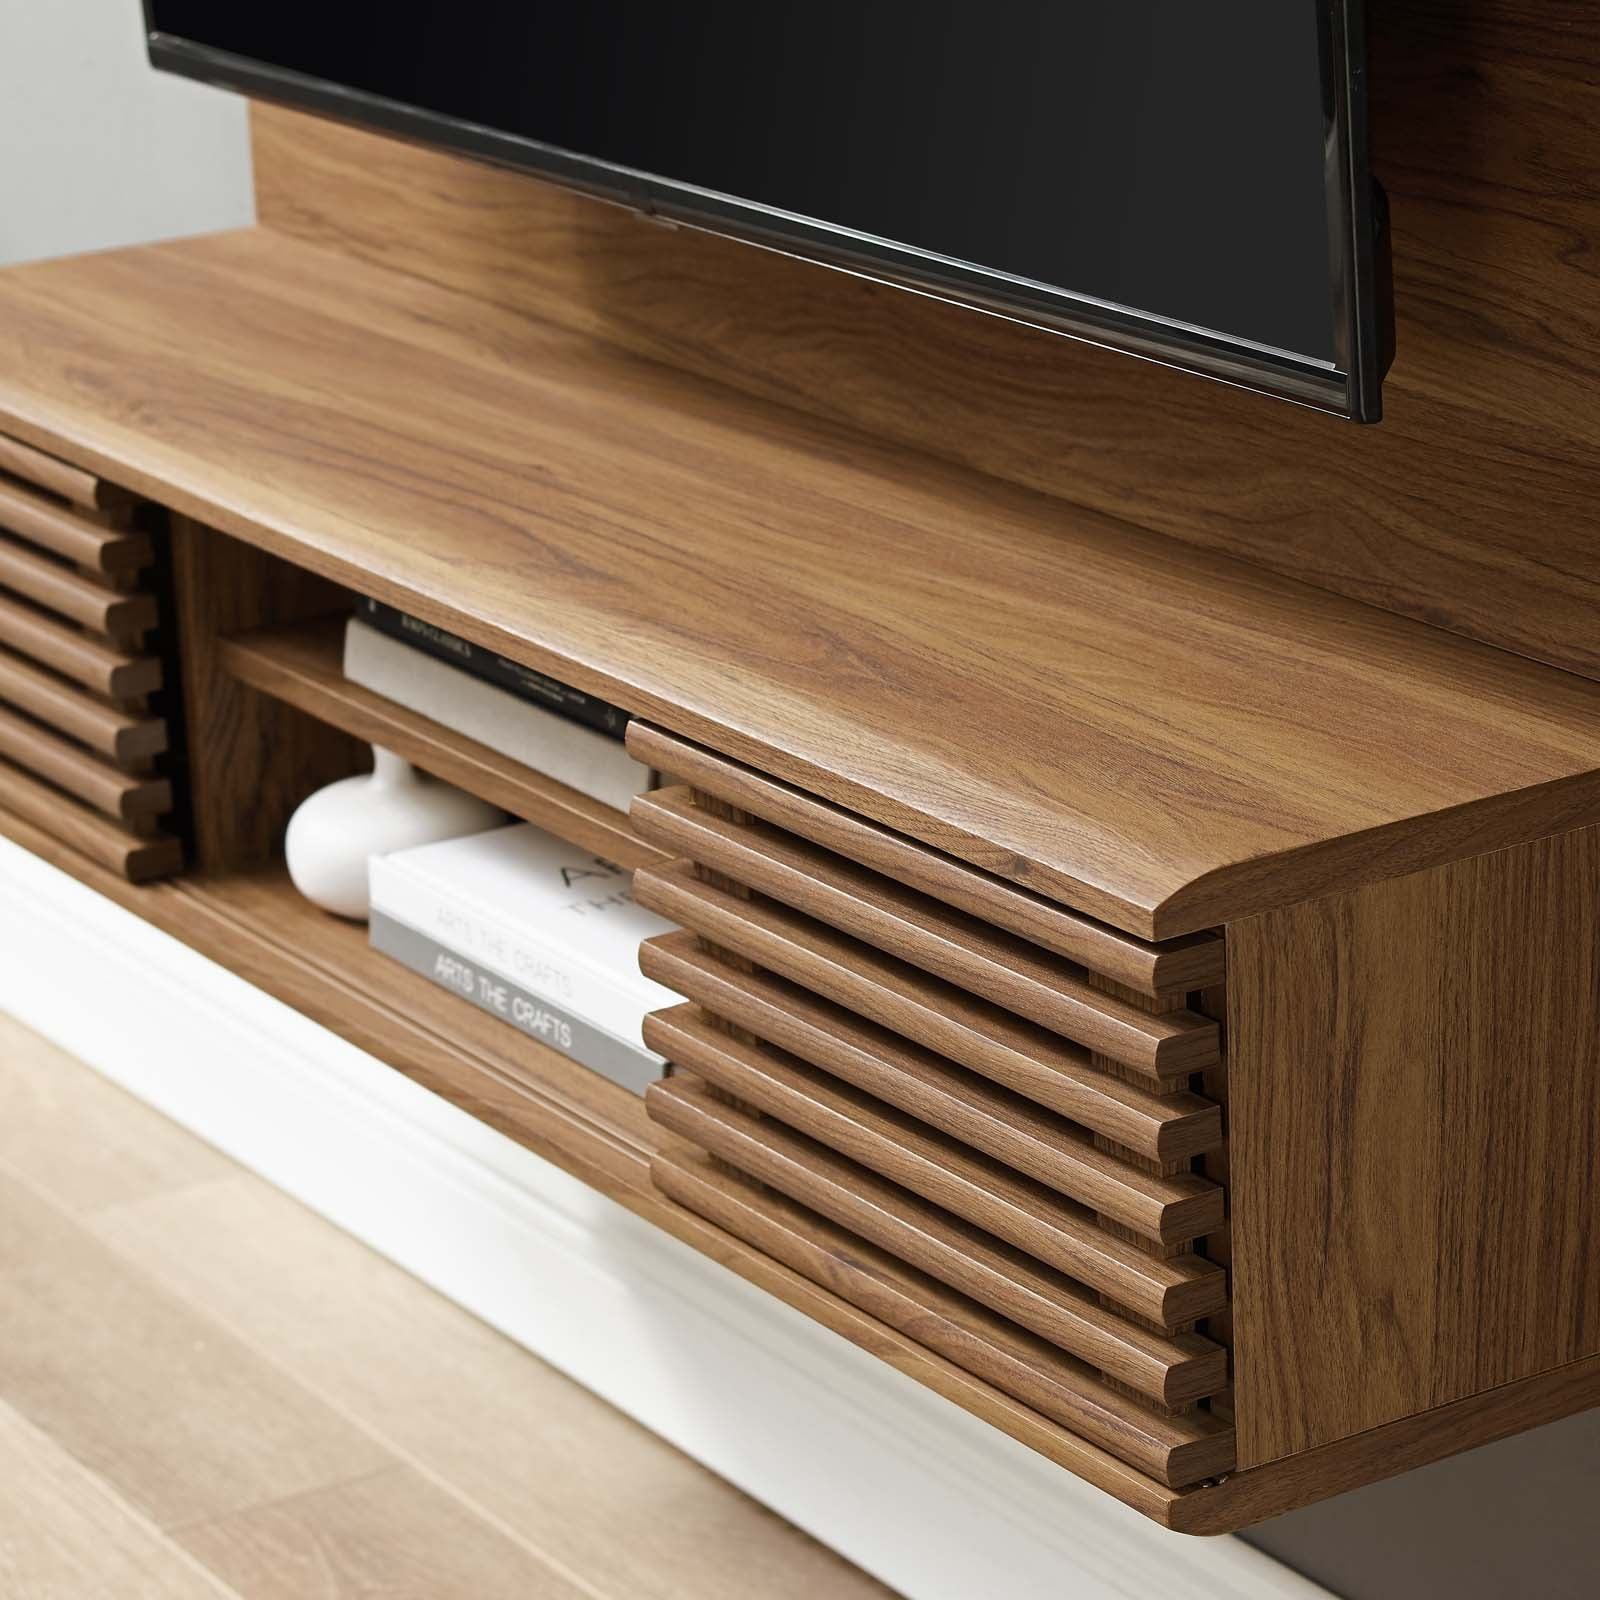 Modway TV & Media Units - Render Wall Mounted TV Stand Entertainment Center Walnut